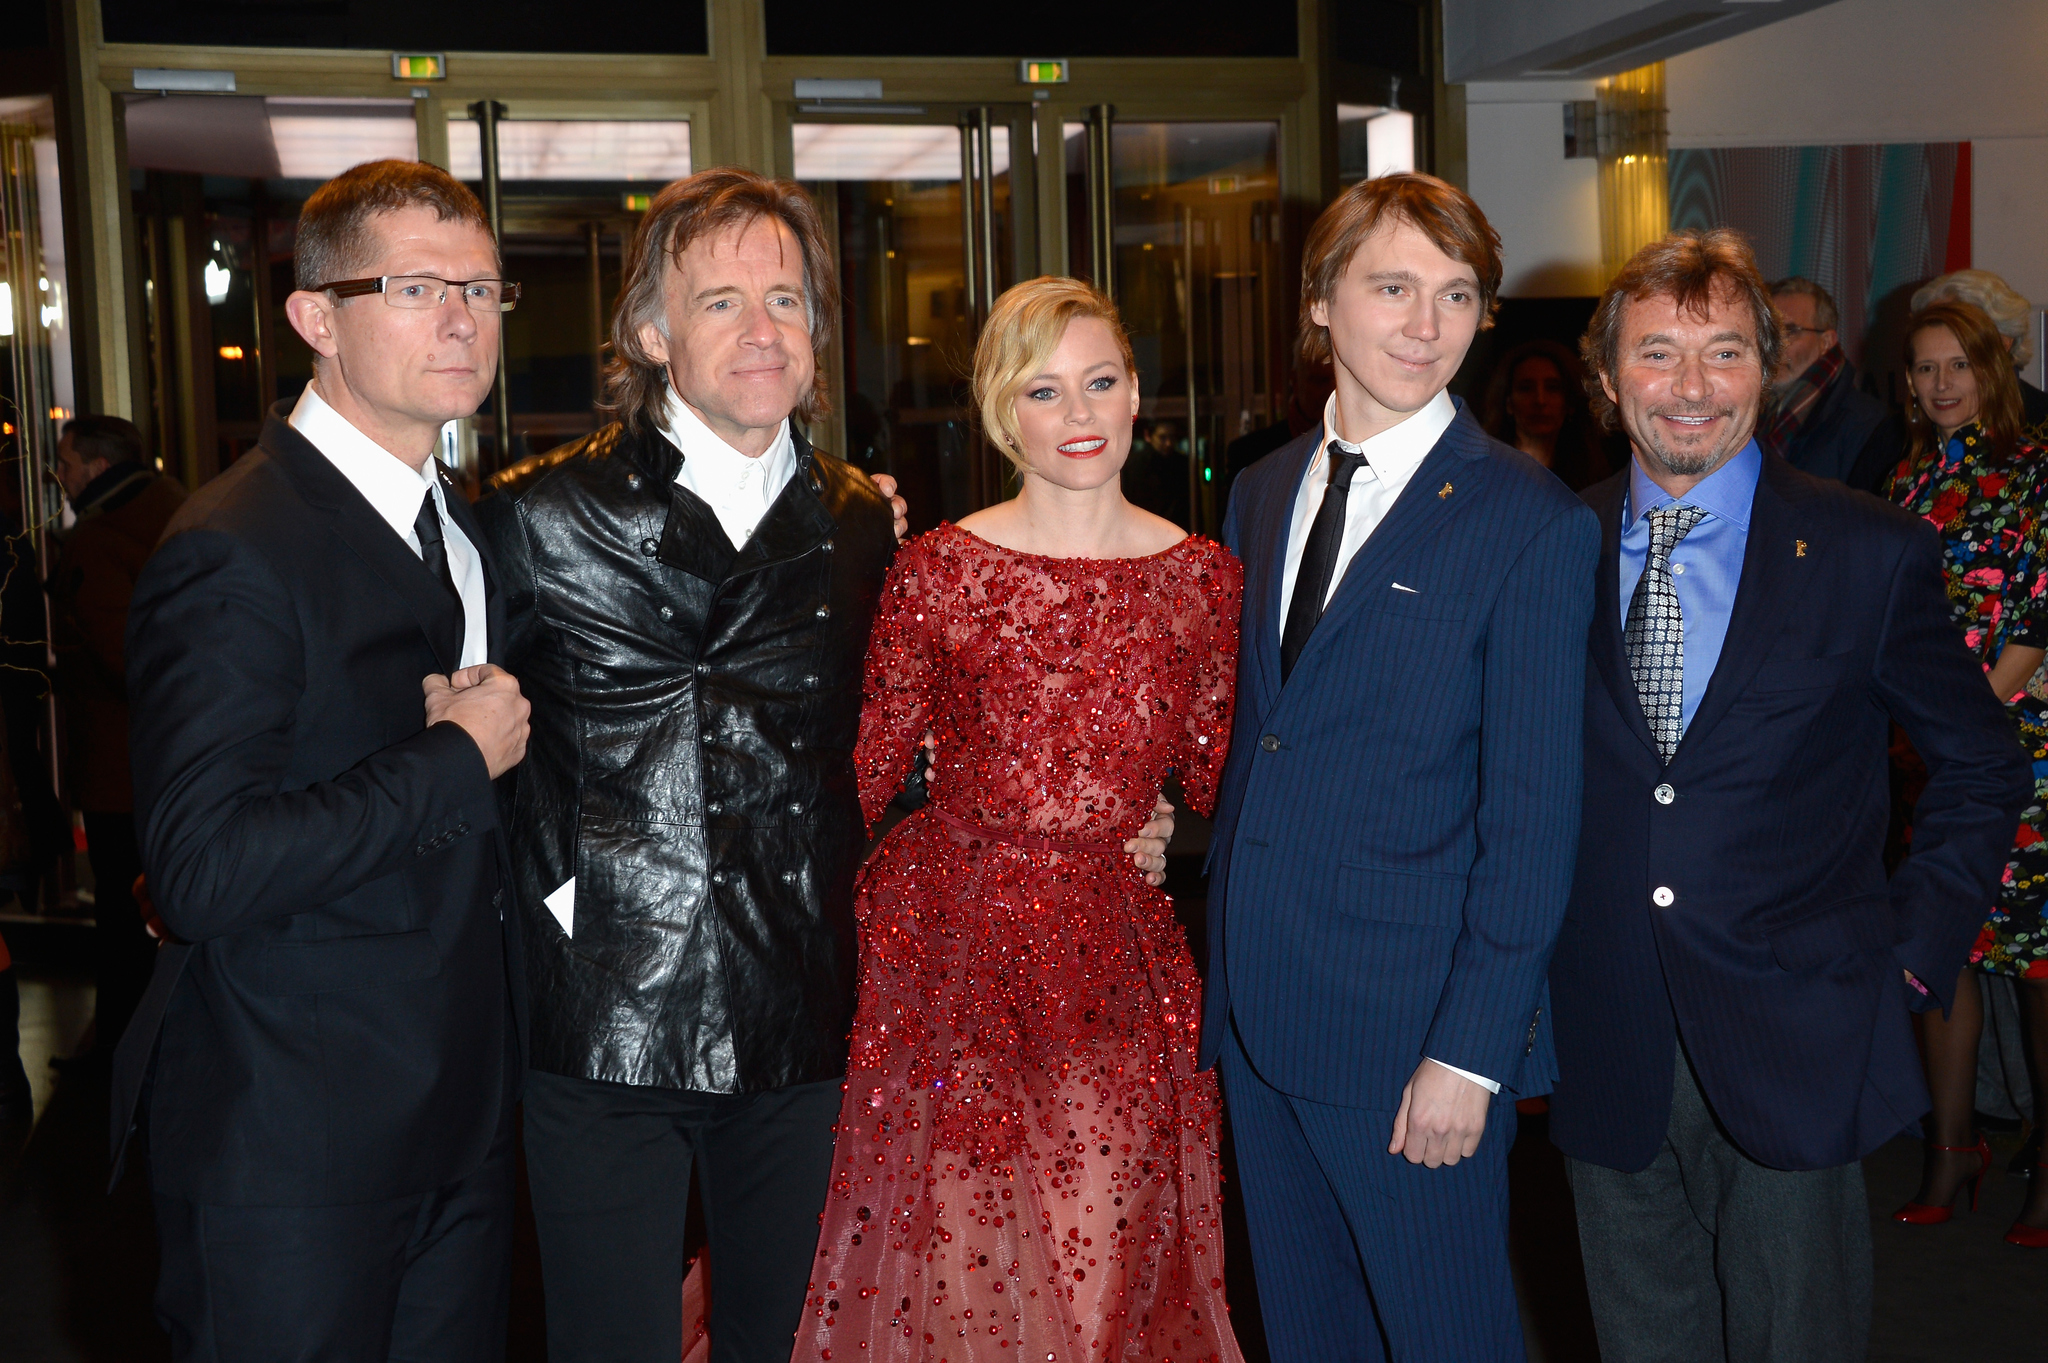 Elizabeth Banks, Paul Dano and Bill Pohlad at event of Love & Mercy (2014)